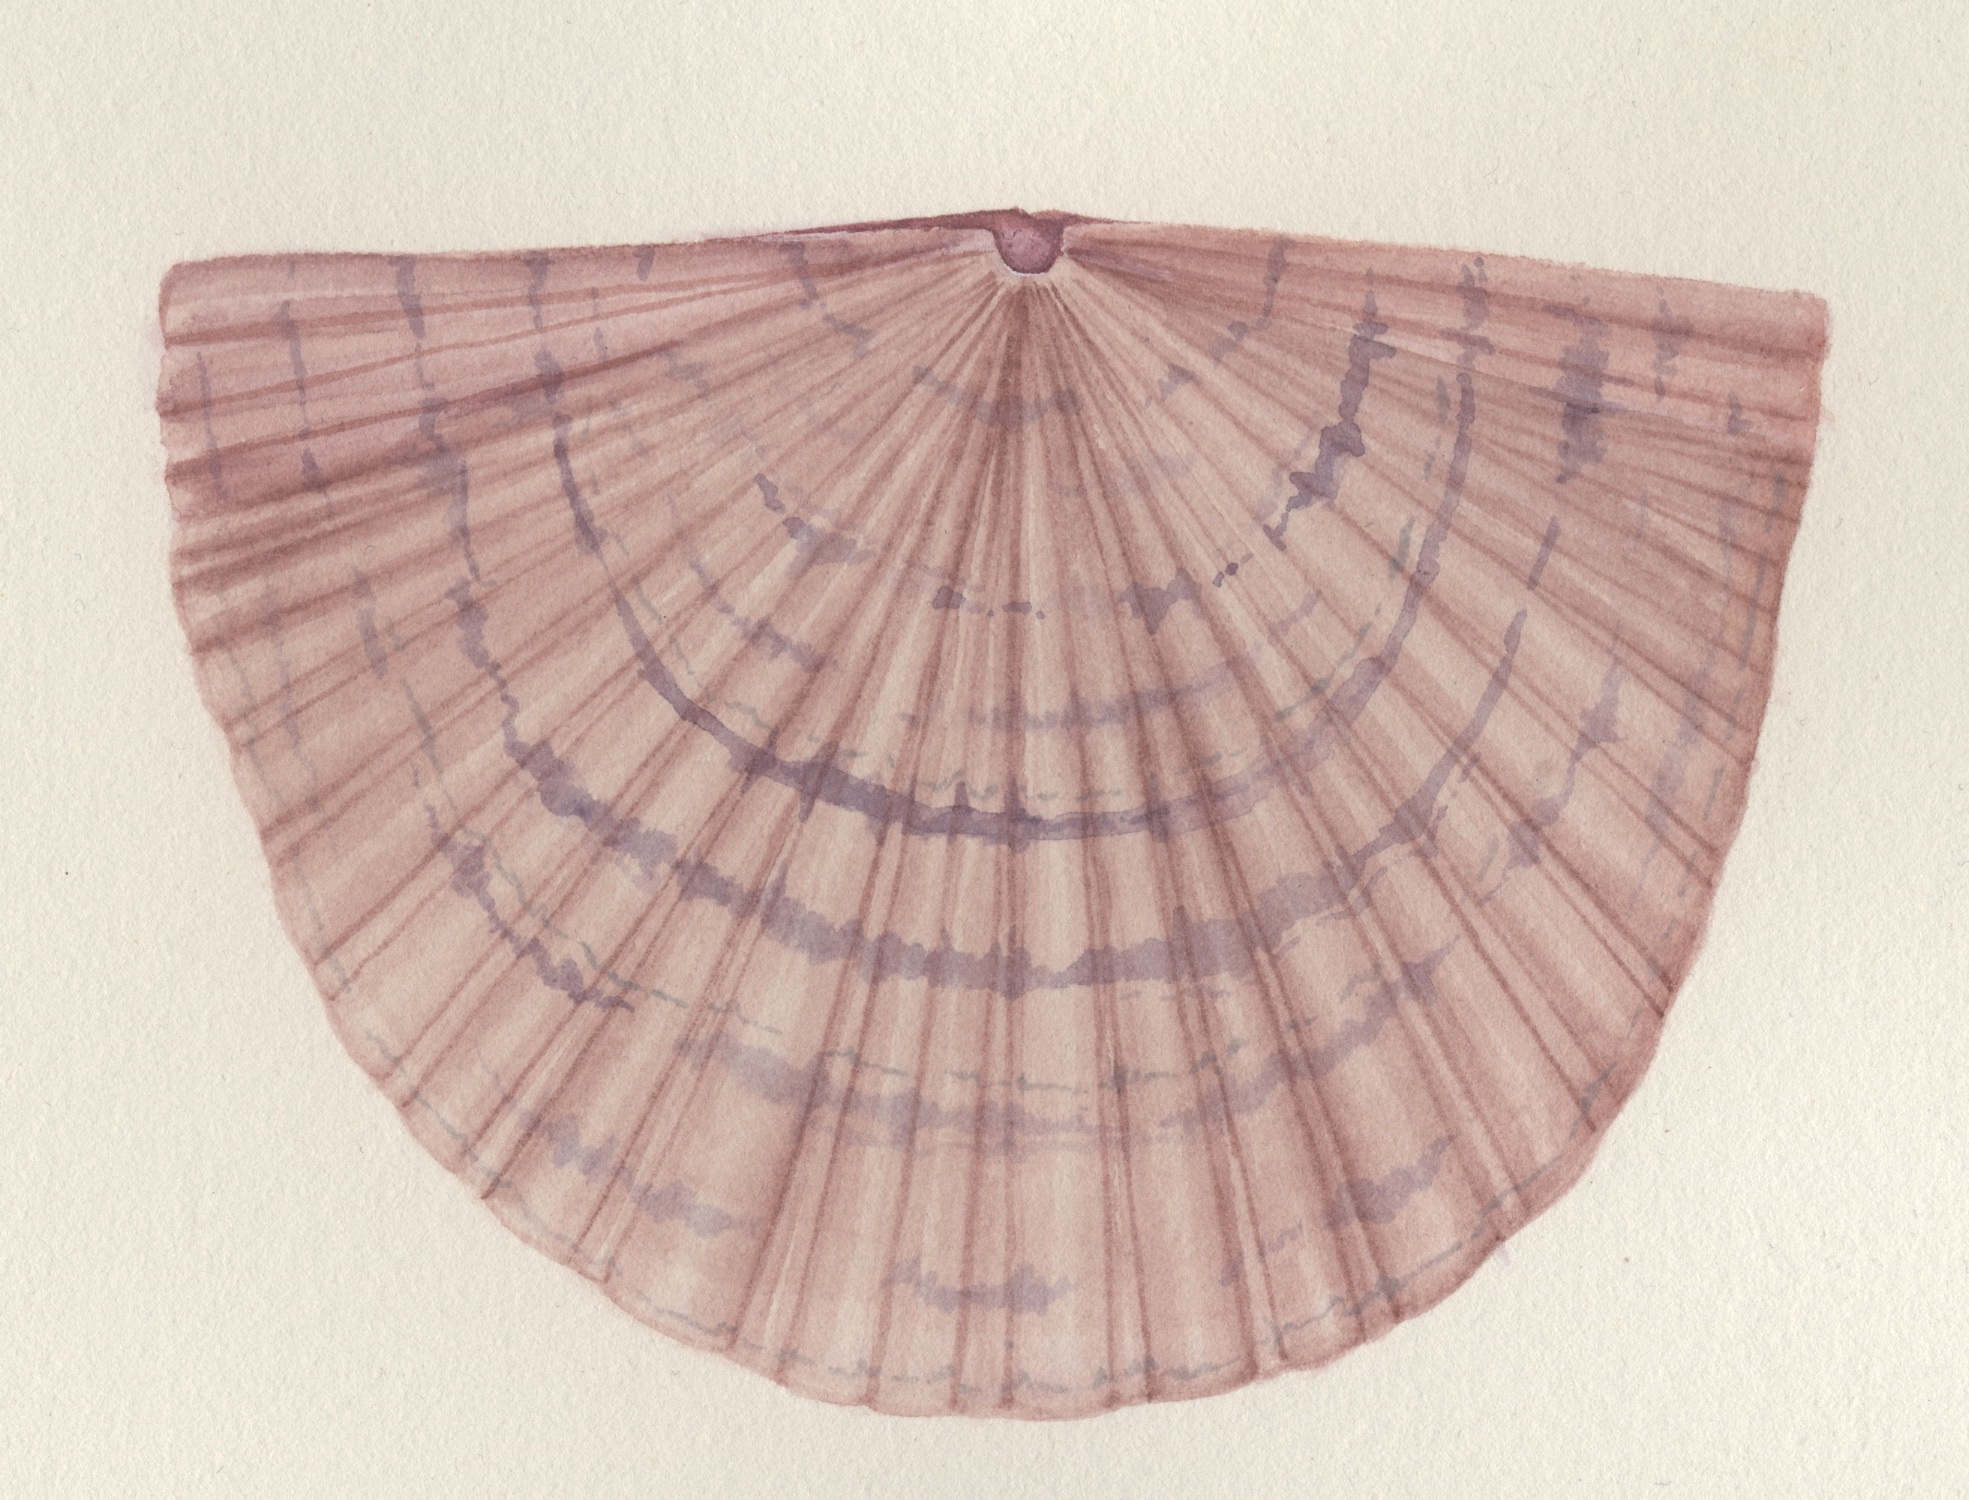 Scientific illustration by Monica Jurik of a Strophomenid brachiopod  based on Dolerorthis sp. from Chicago and Wisconsin. Common Silurian level bottom community brachiopod from the Chicago - Milwaukee area. The illustration is a water color based on specimens in our collections.